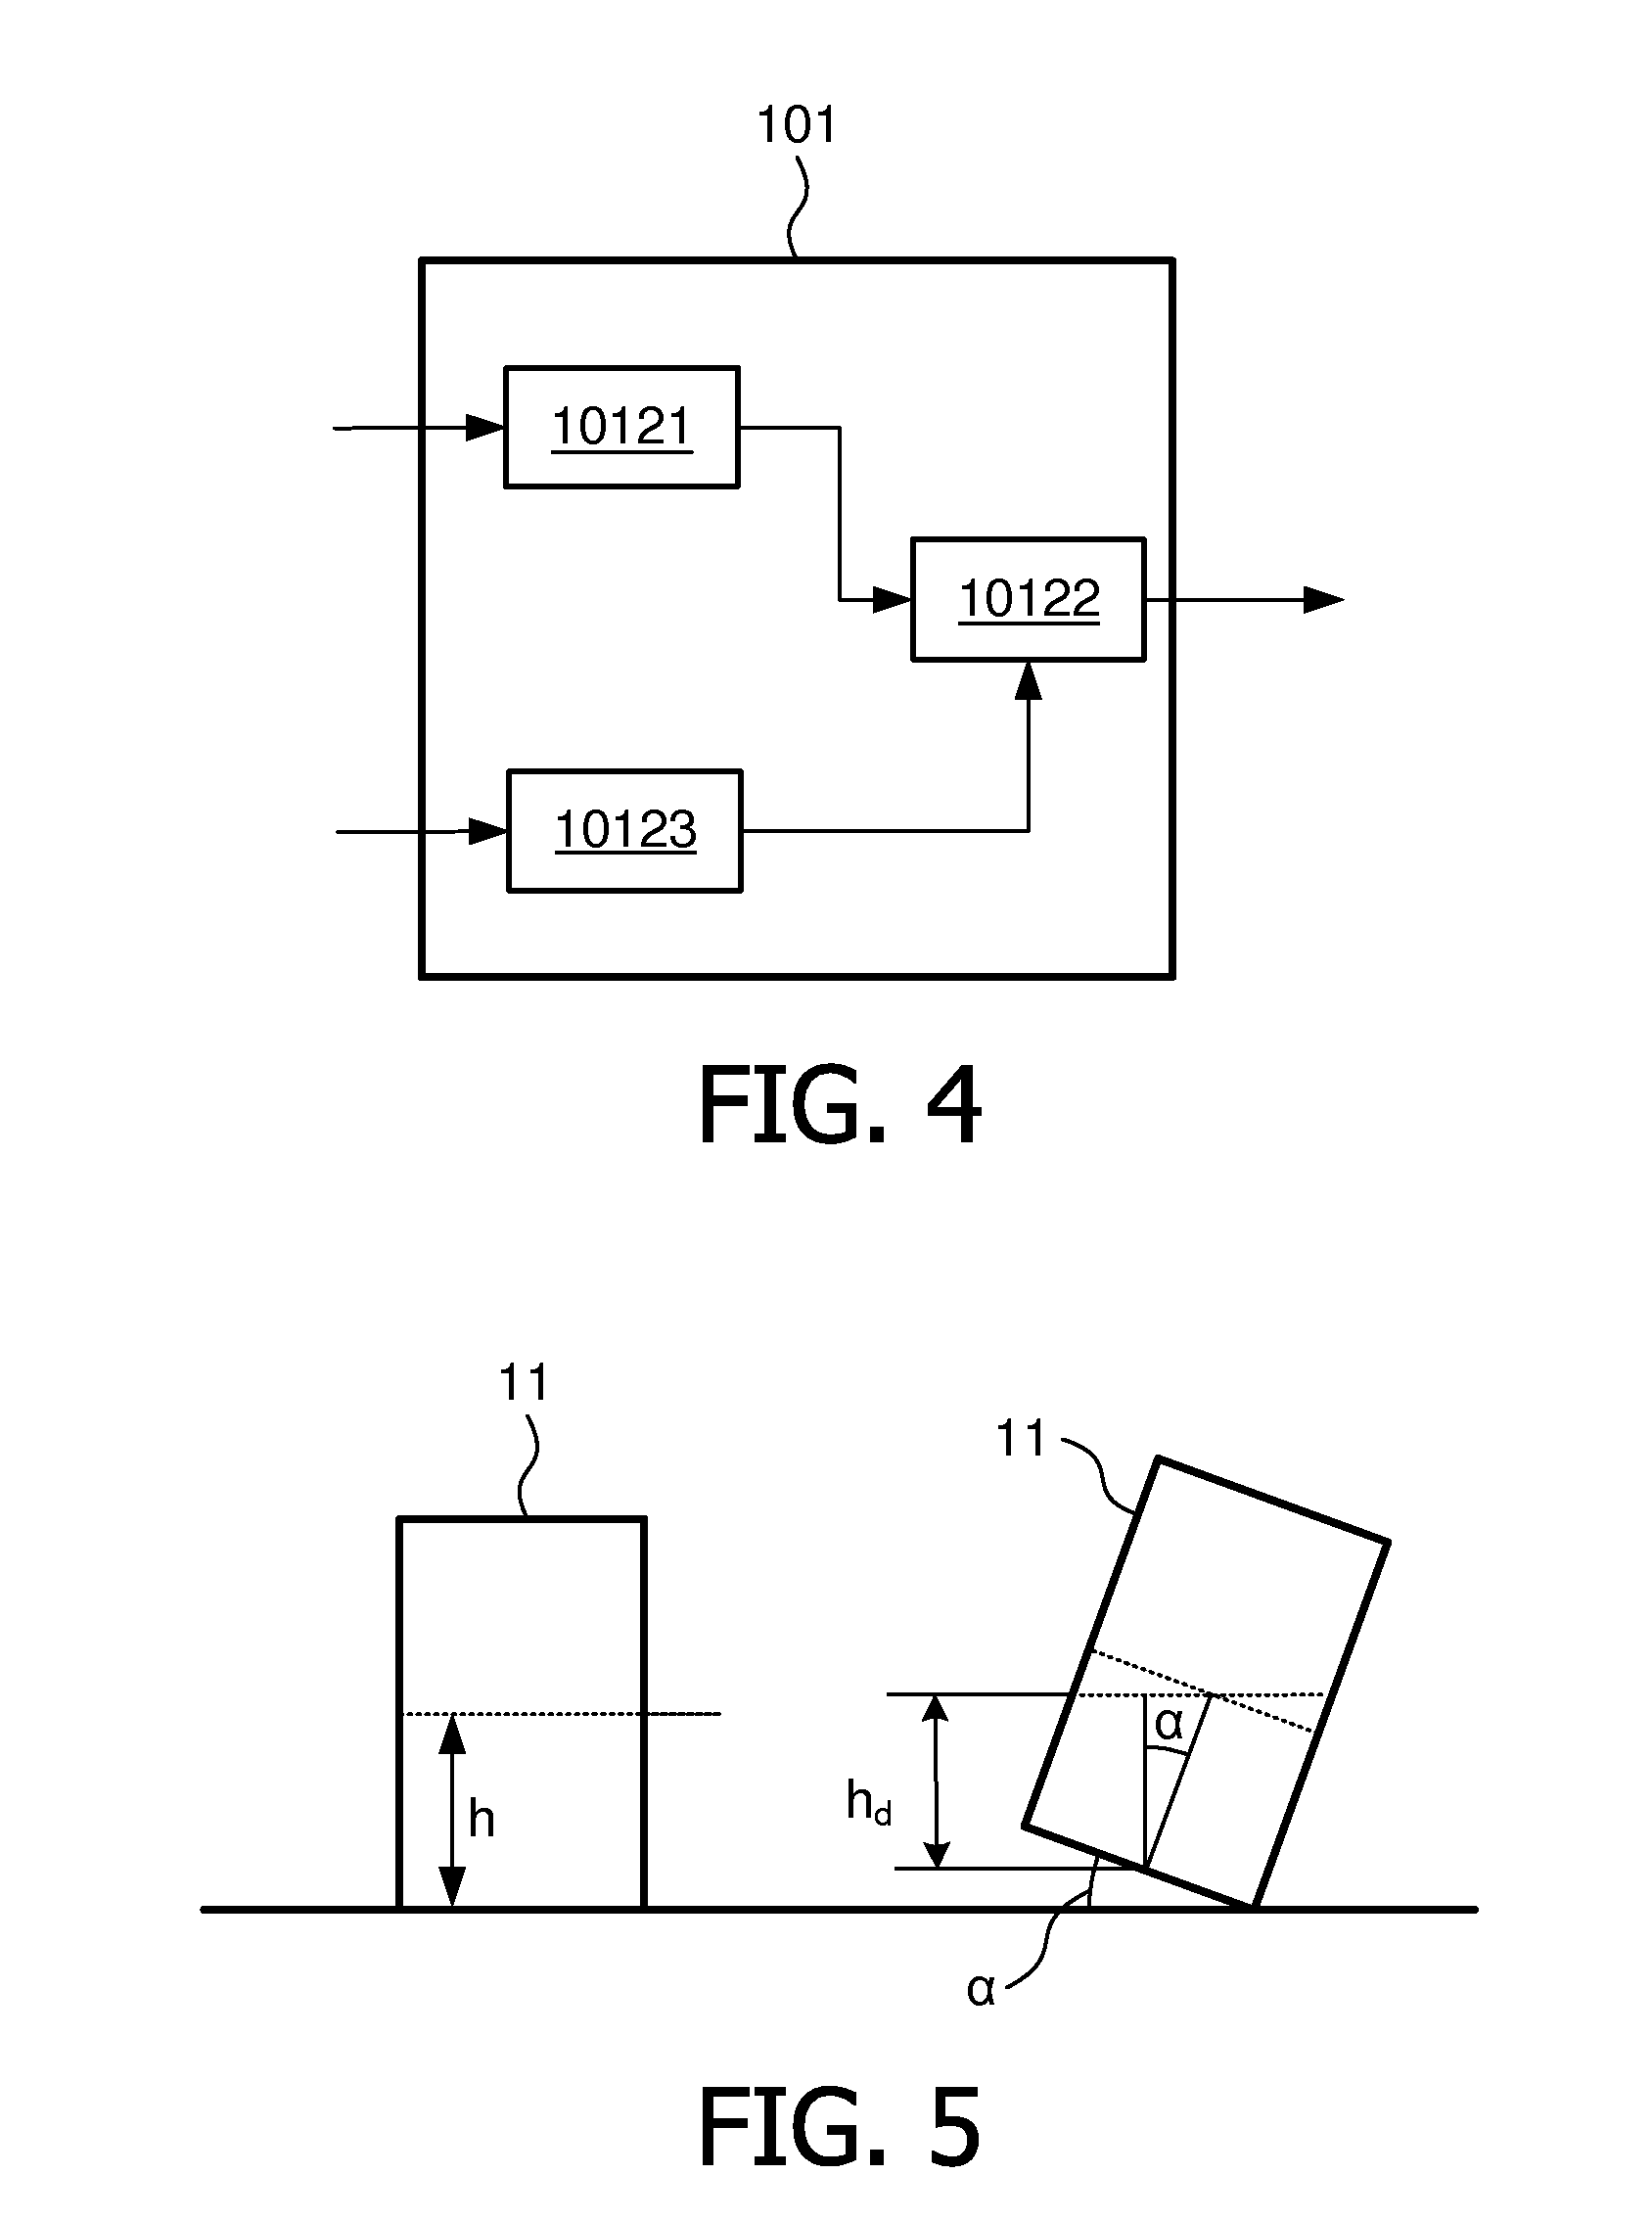 Apparatuses and Methods for Managing Liquid Volume in a Container